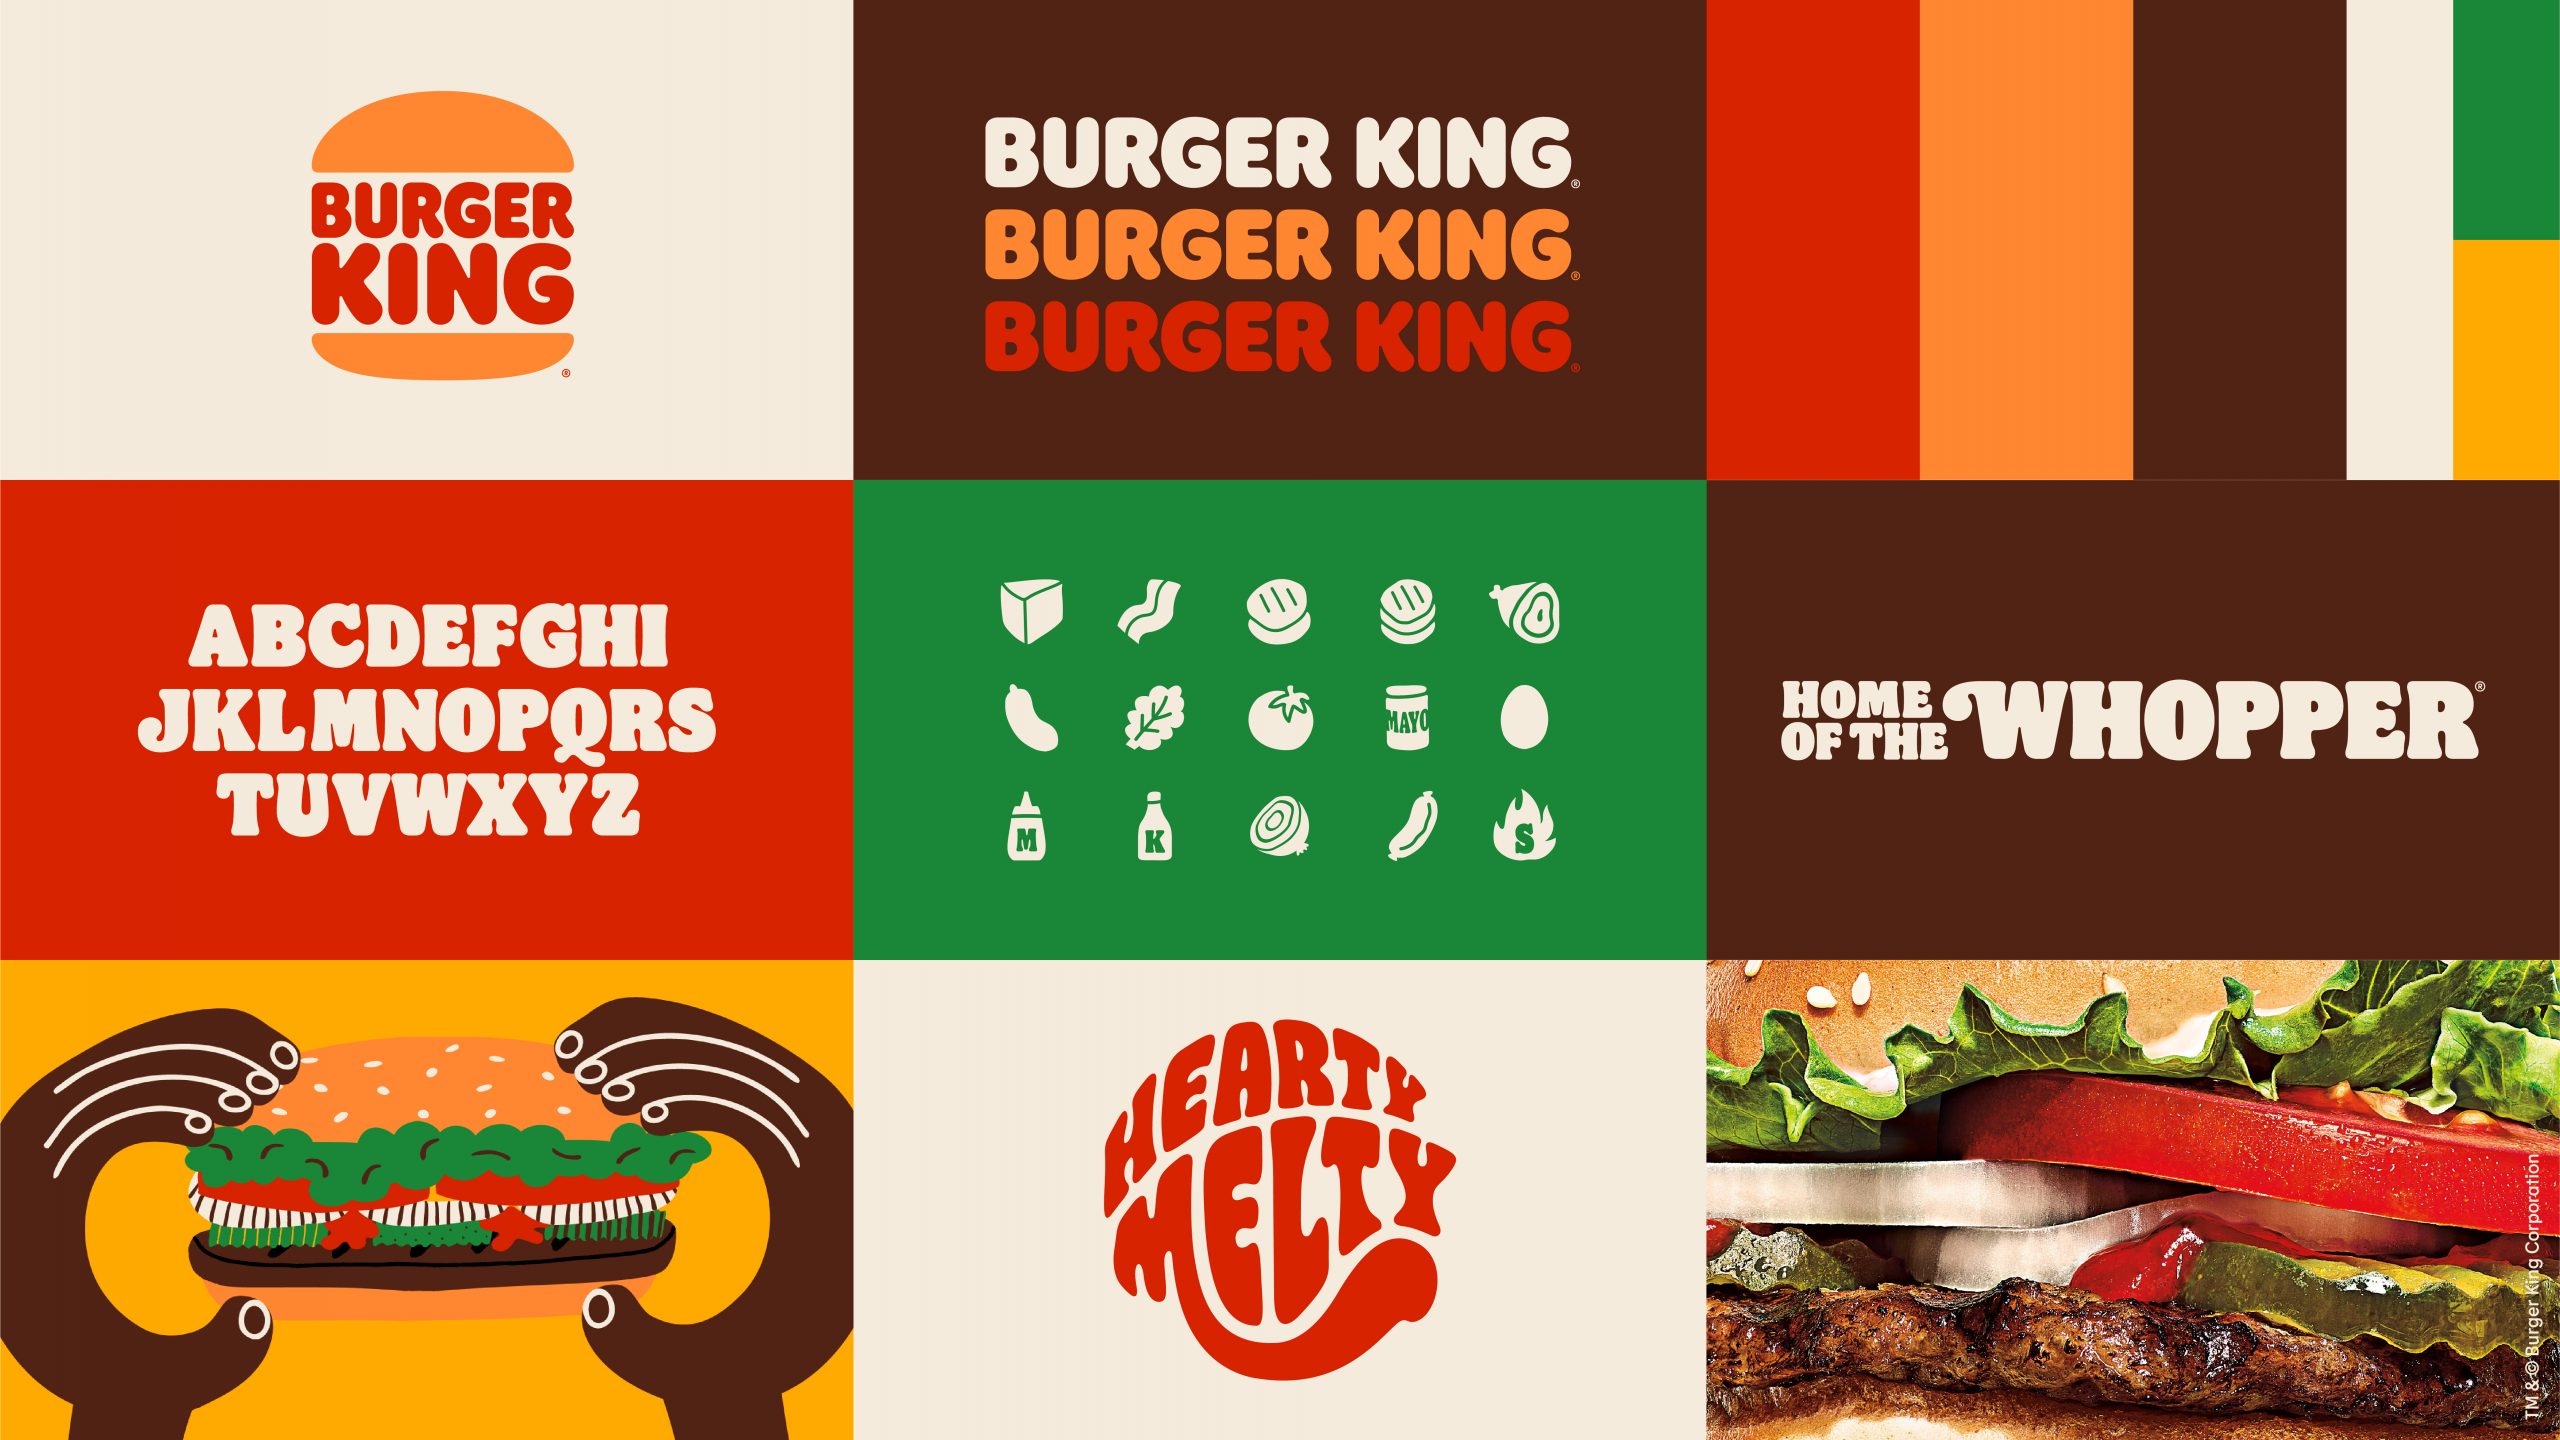 The Burger King Rebrand: Design Fit for a King? – PRINT Magazine